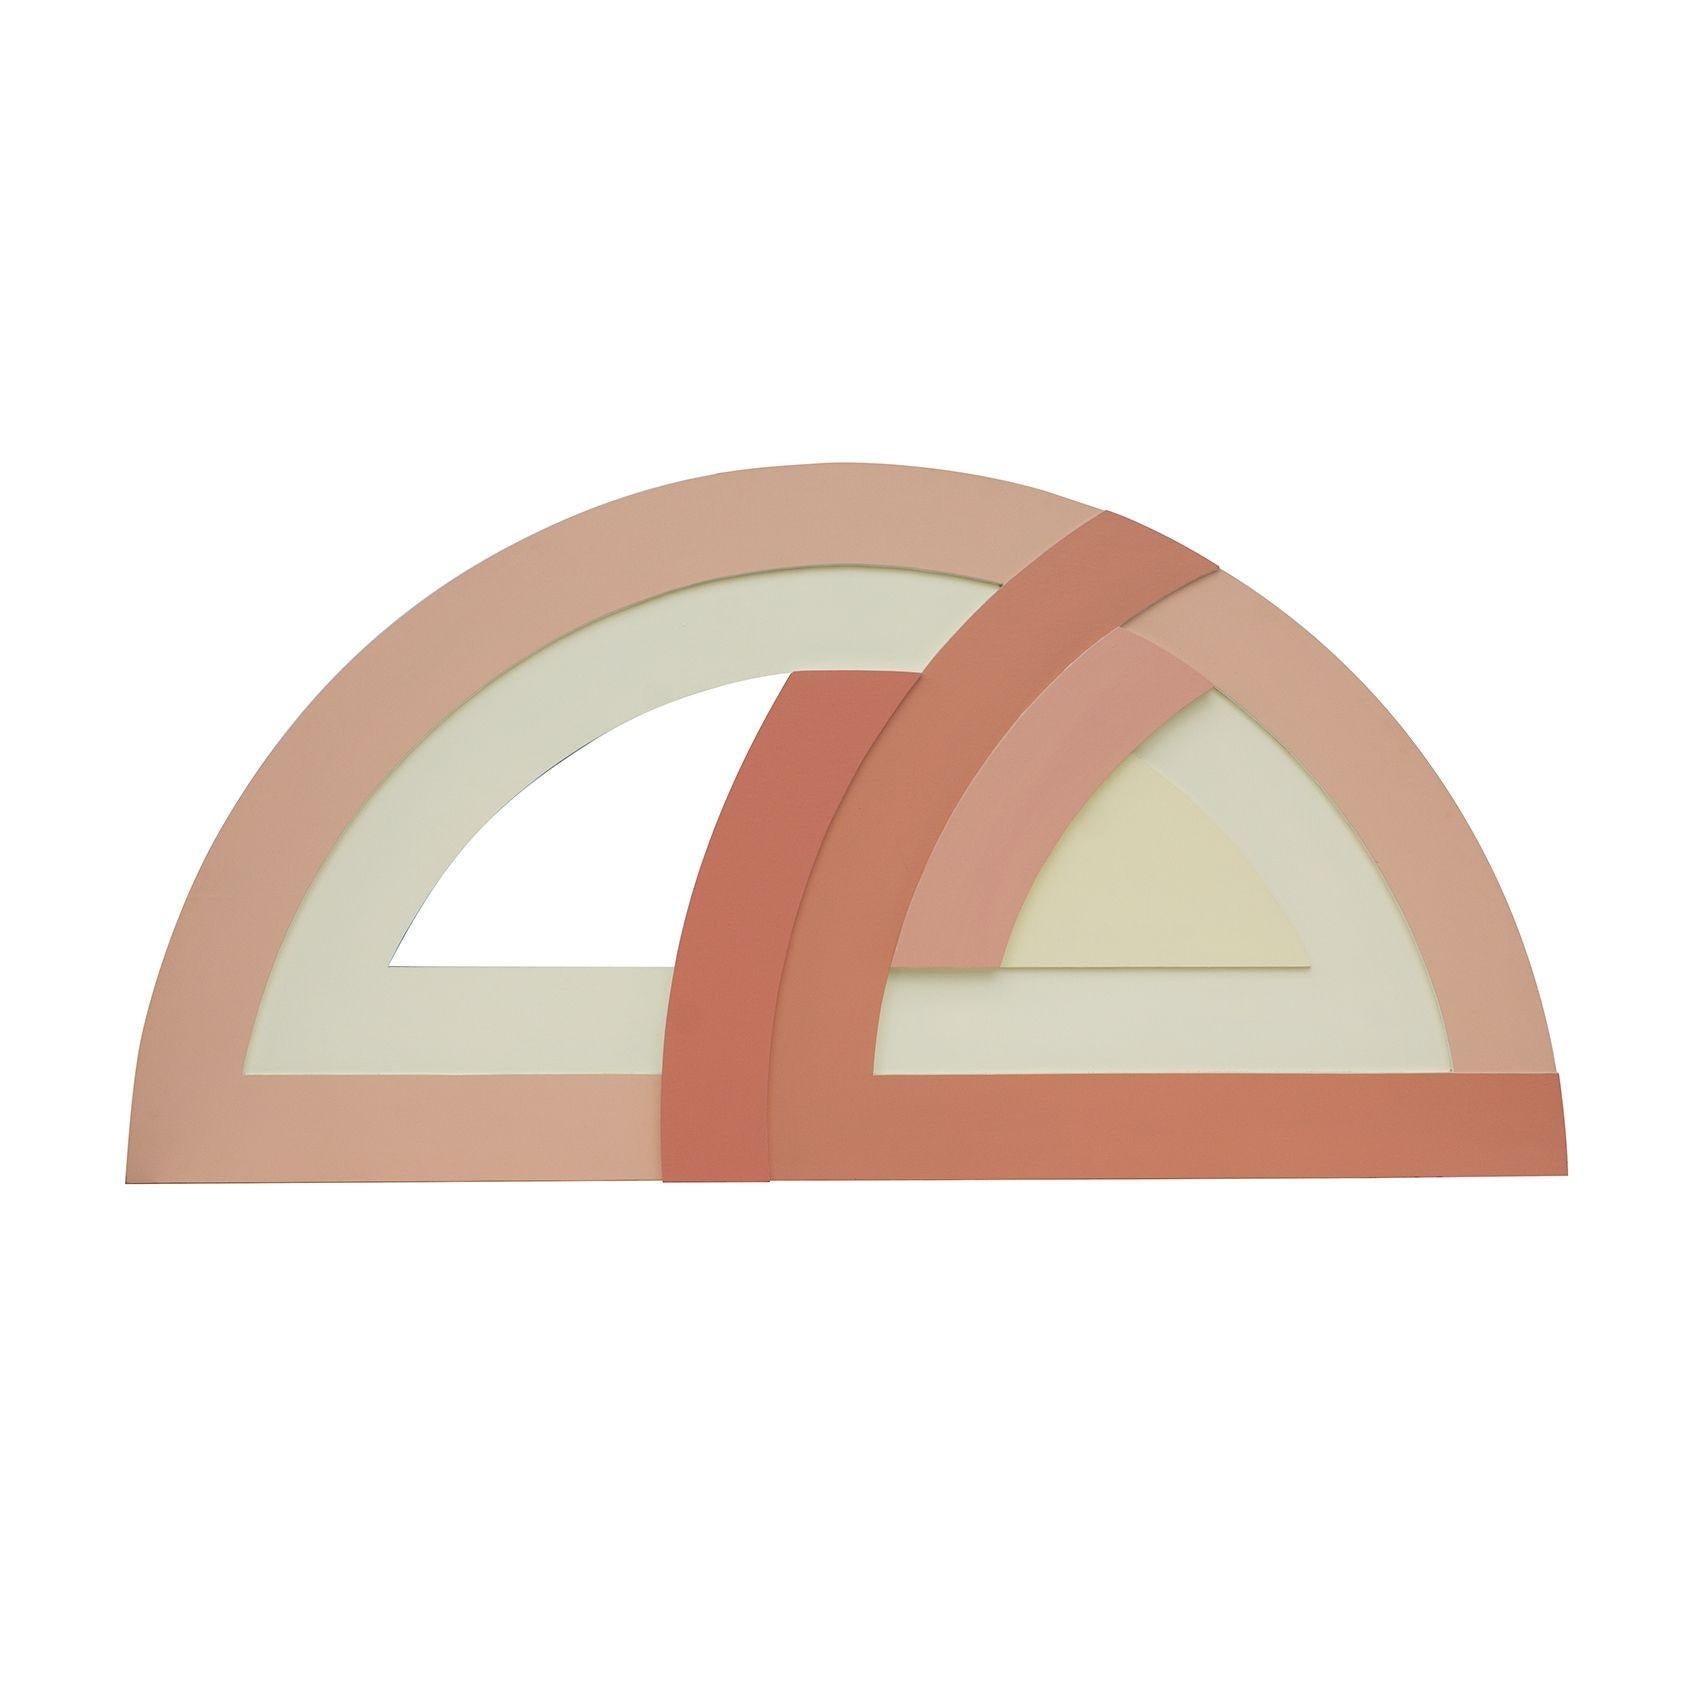 USA, 1960s
Large 'protractor' shaped painting on plywood. In the style of Frank Stella. Large piece and substantial in weight. It has a cutout at the middle, is painted in peaches, creams, and whites, and the piece has varied depths for a bit of a